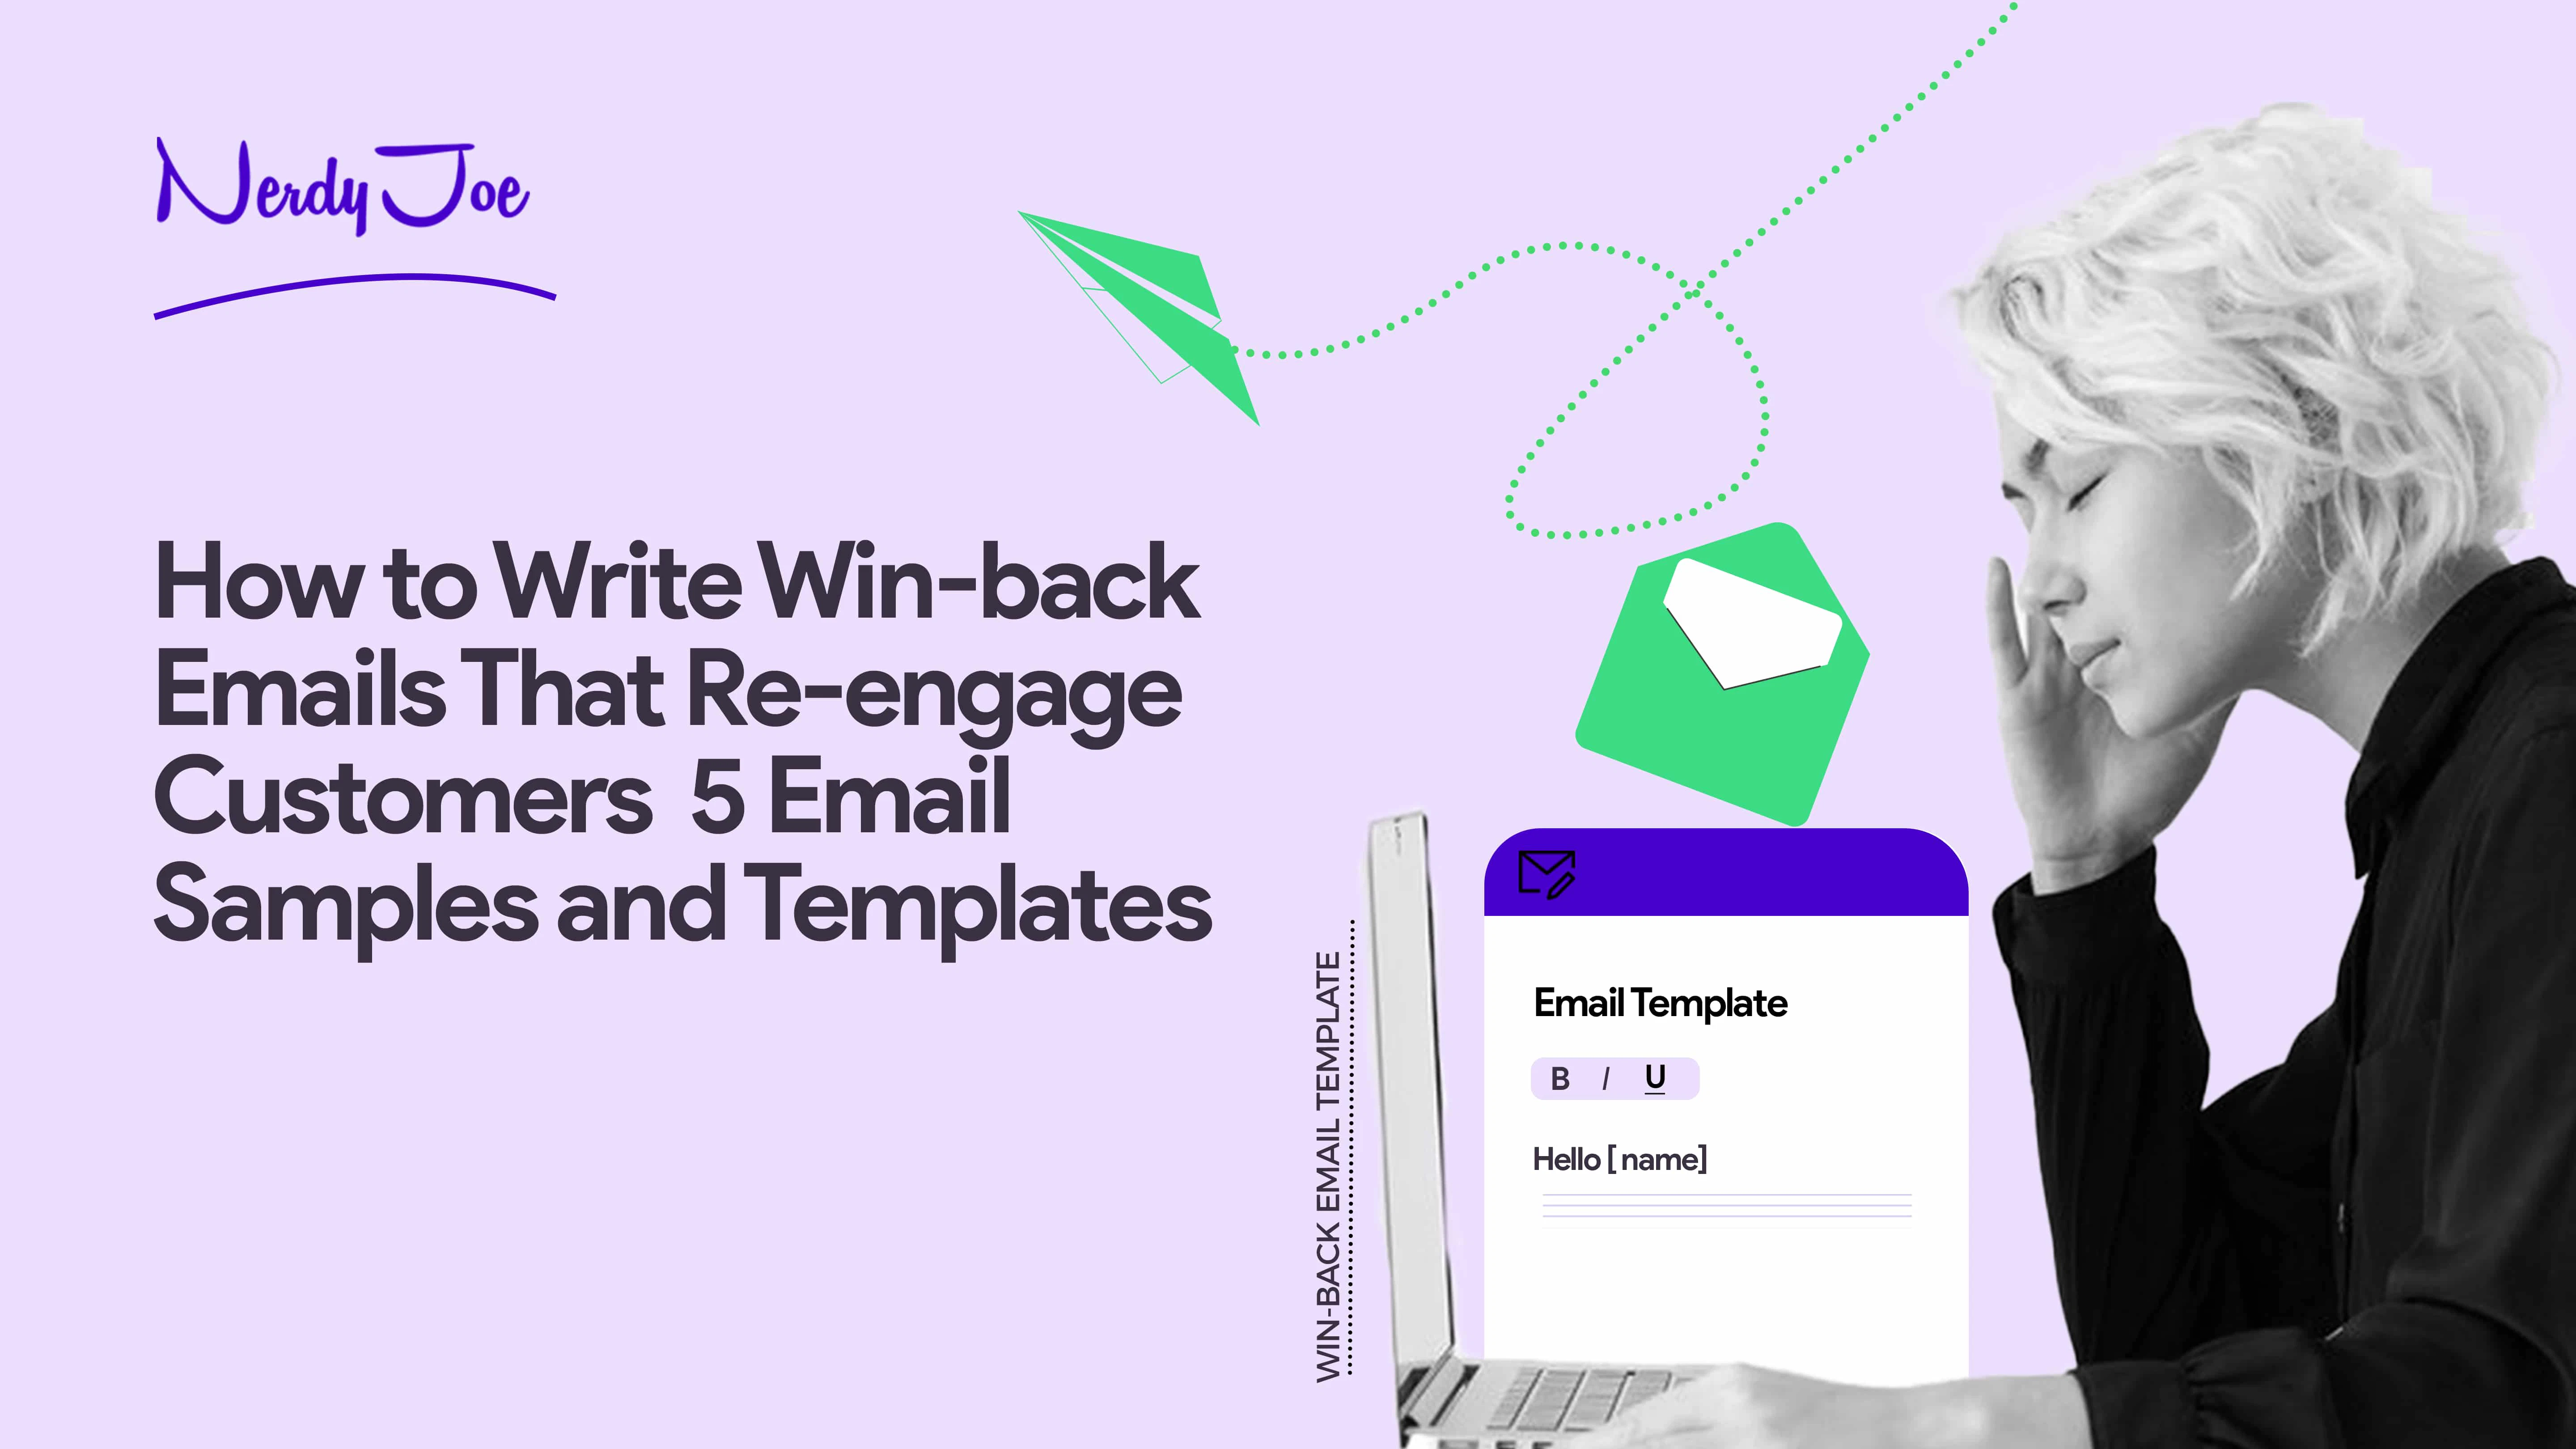 How to Write Win-back Emails With 5 Email Templates